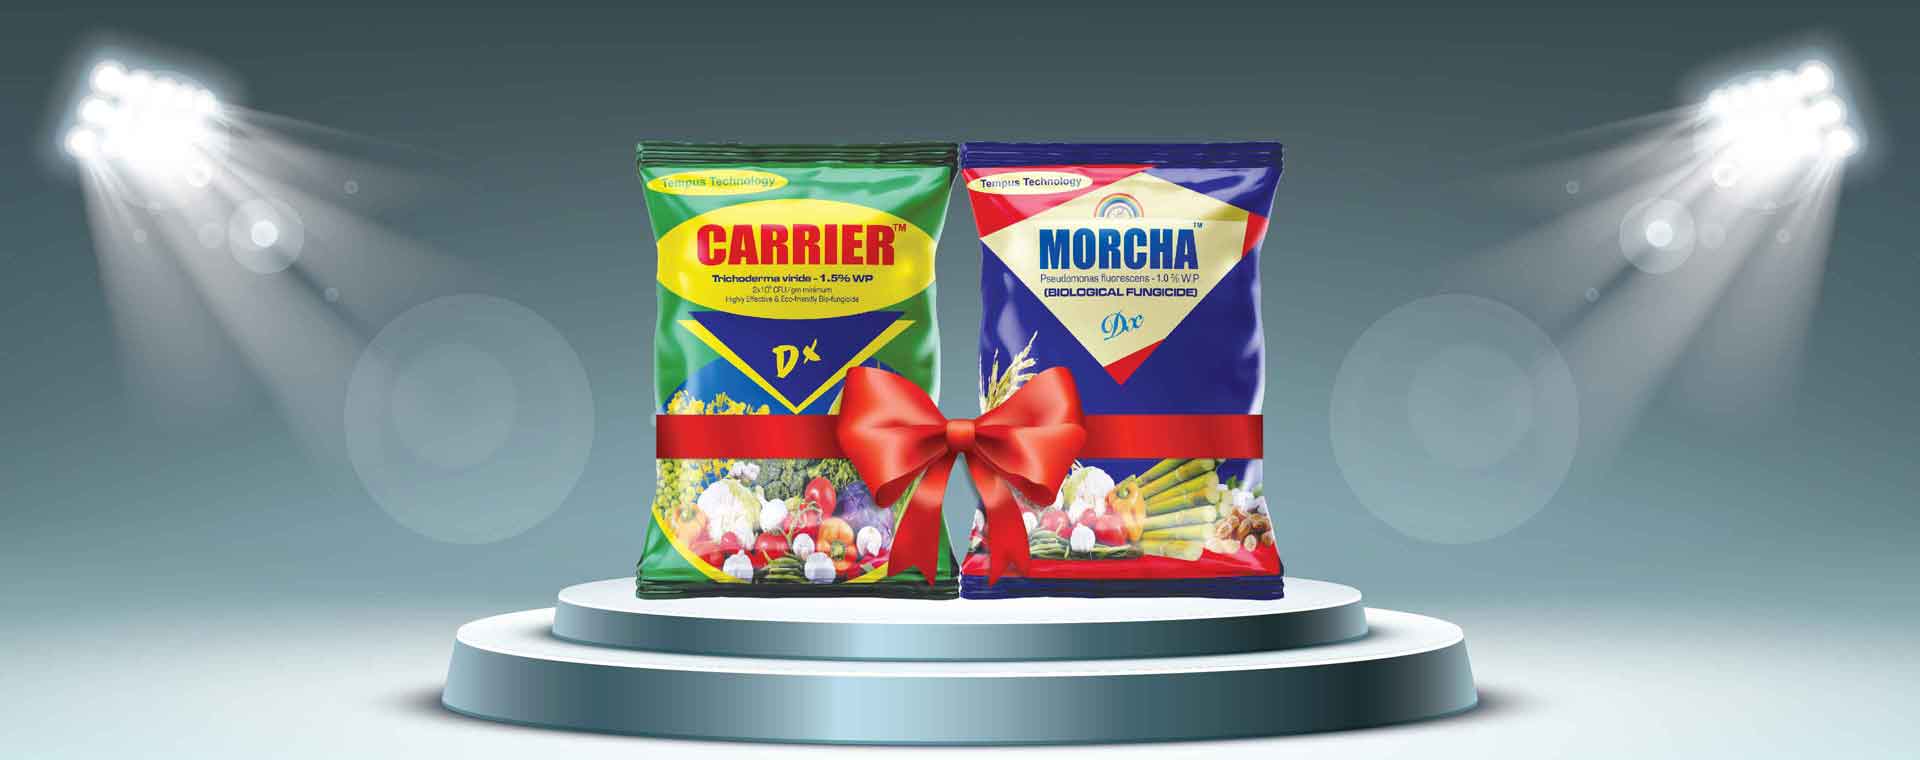 dxcombo carrier and morcha biopesticides